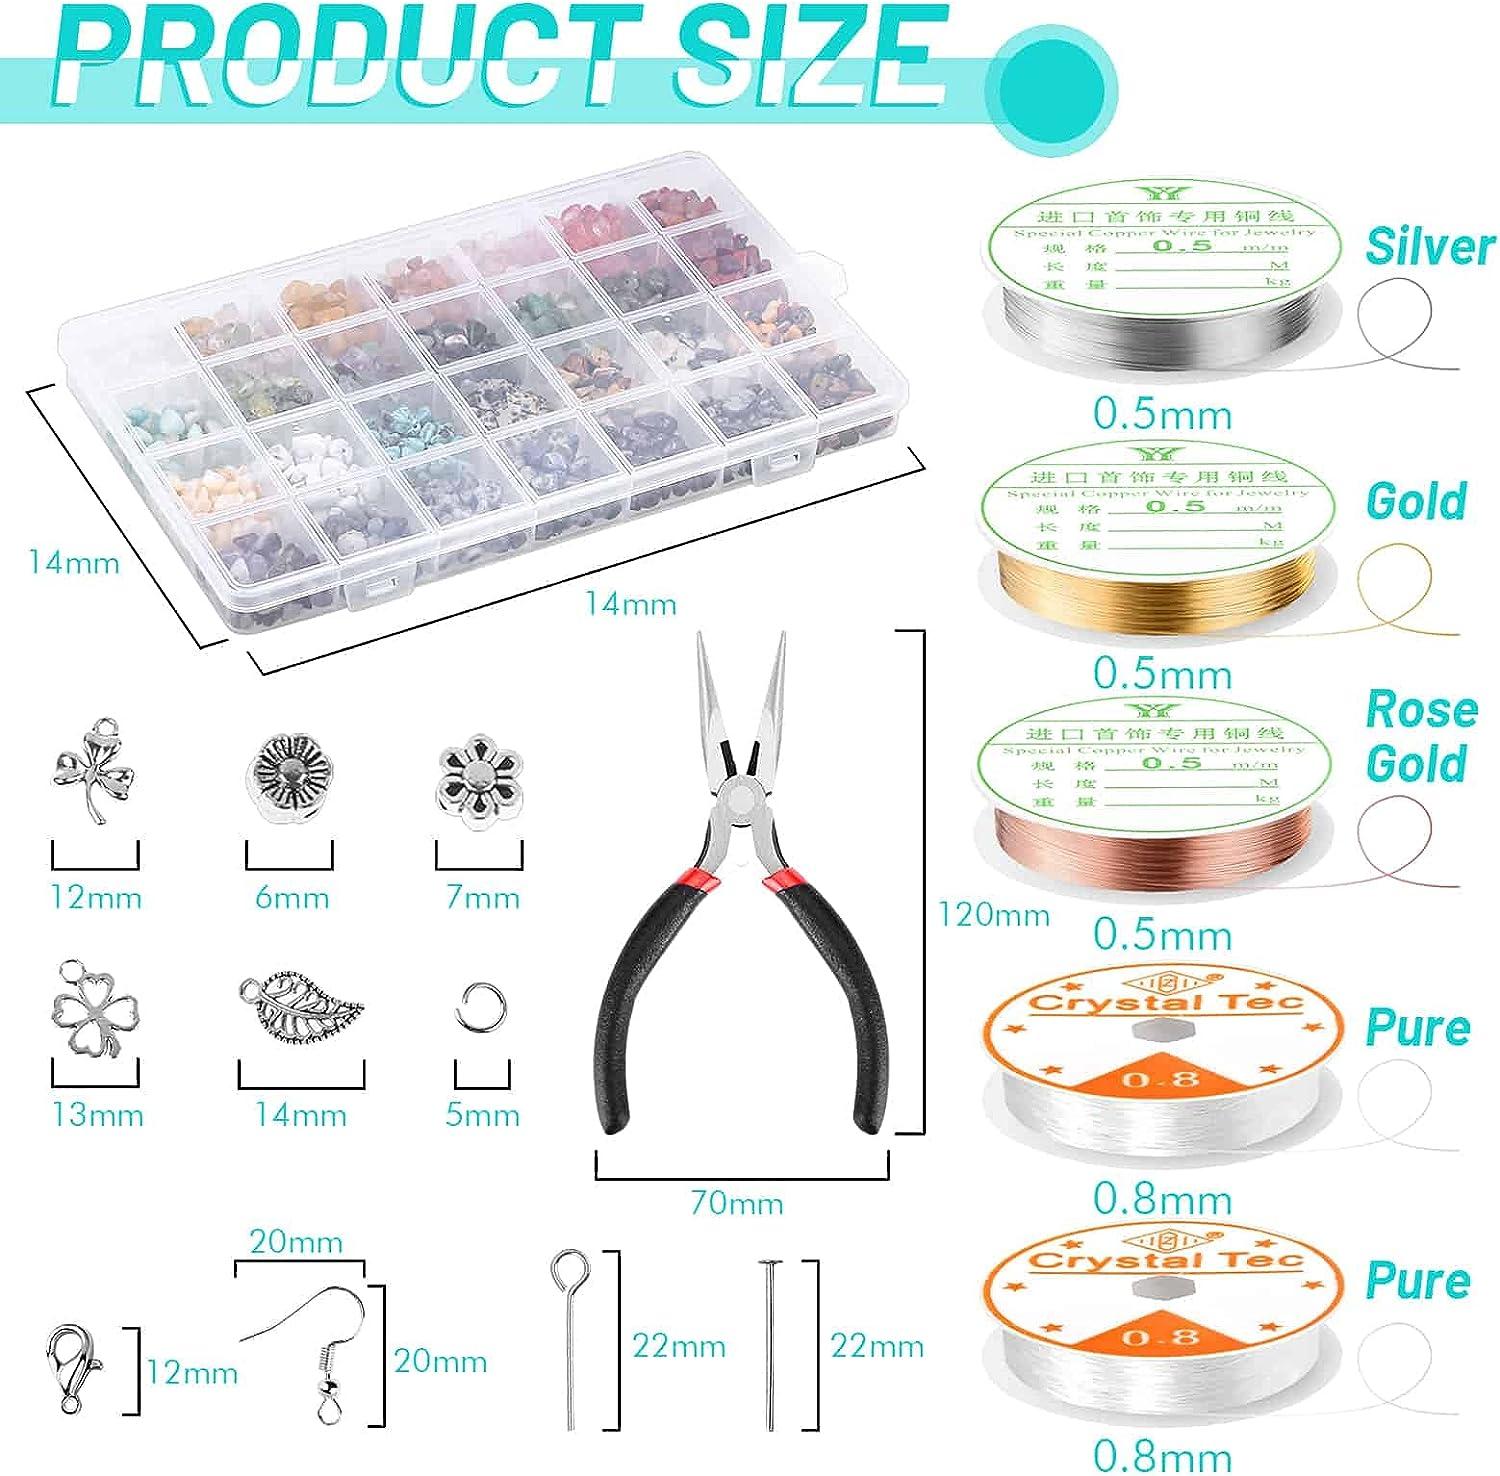  selizo Jewelry Making Kits for Adults Women with 28 Colors  Crystal Beads, 1660Pcs Crystal Bead Ring Maker Kit with Jewelry Making  Supplies